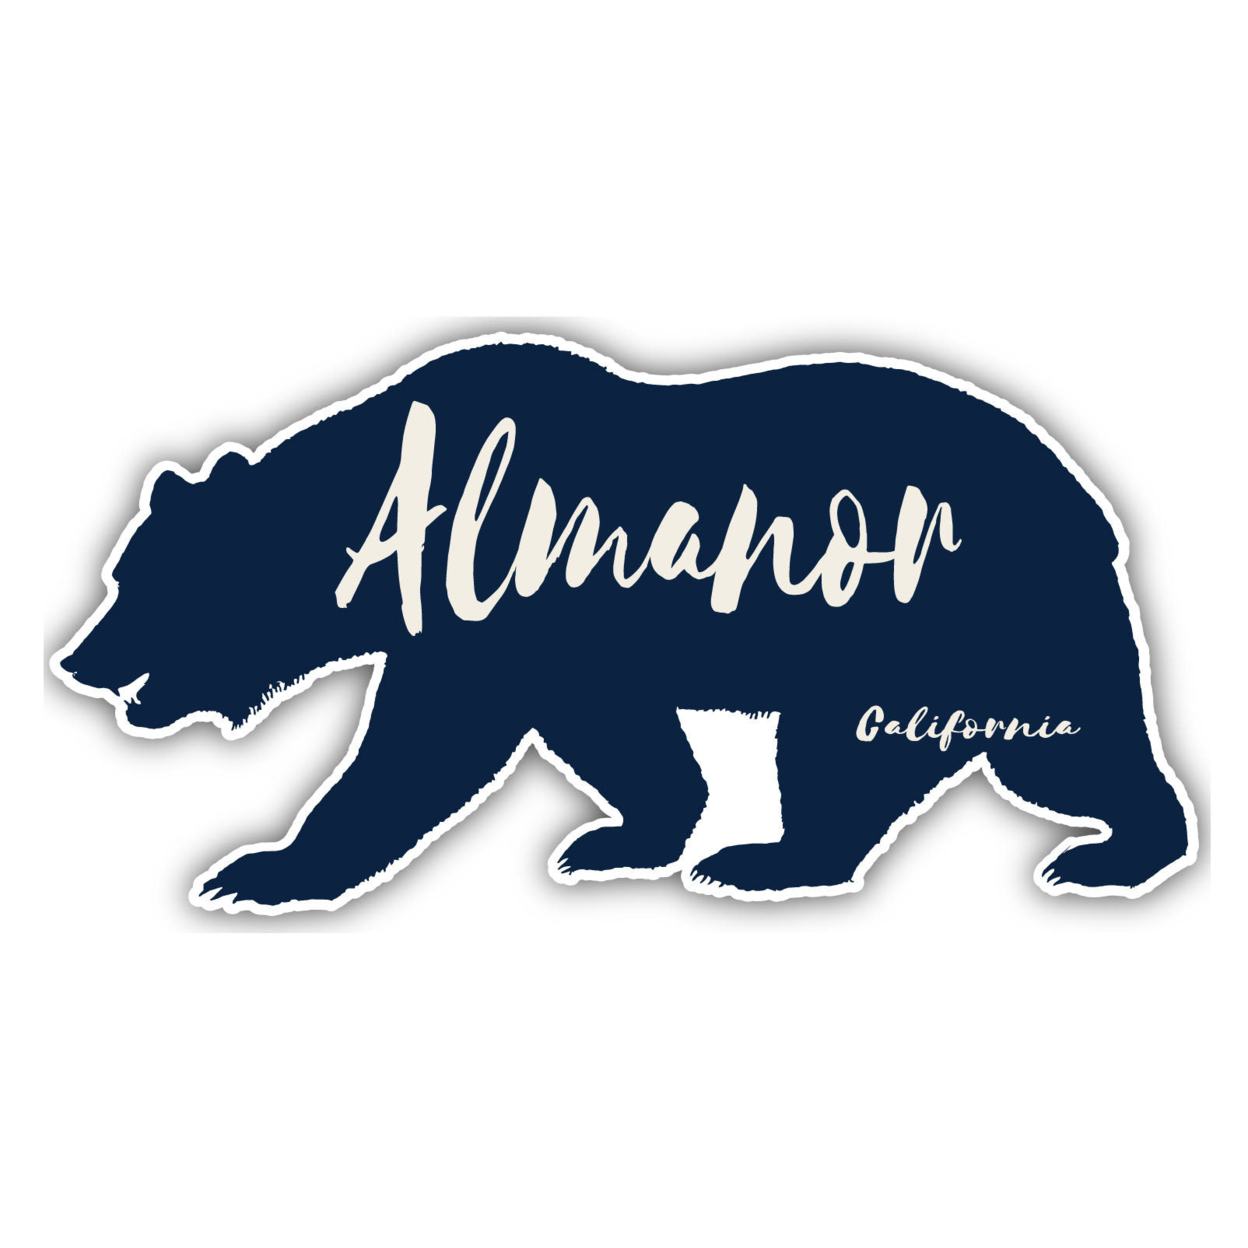 Almanor California Souvenir Decorative Stickers (Choose Theme And Size) - 4-Pack, 10-Inch, Bear